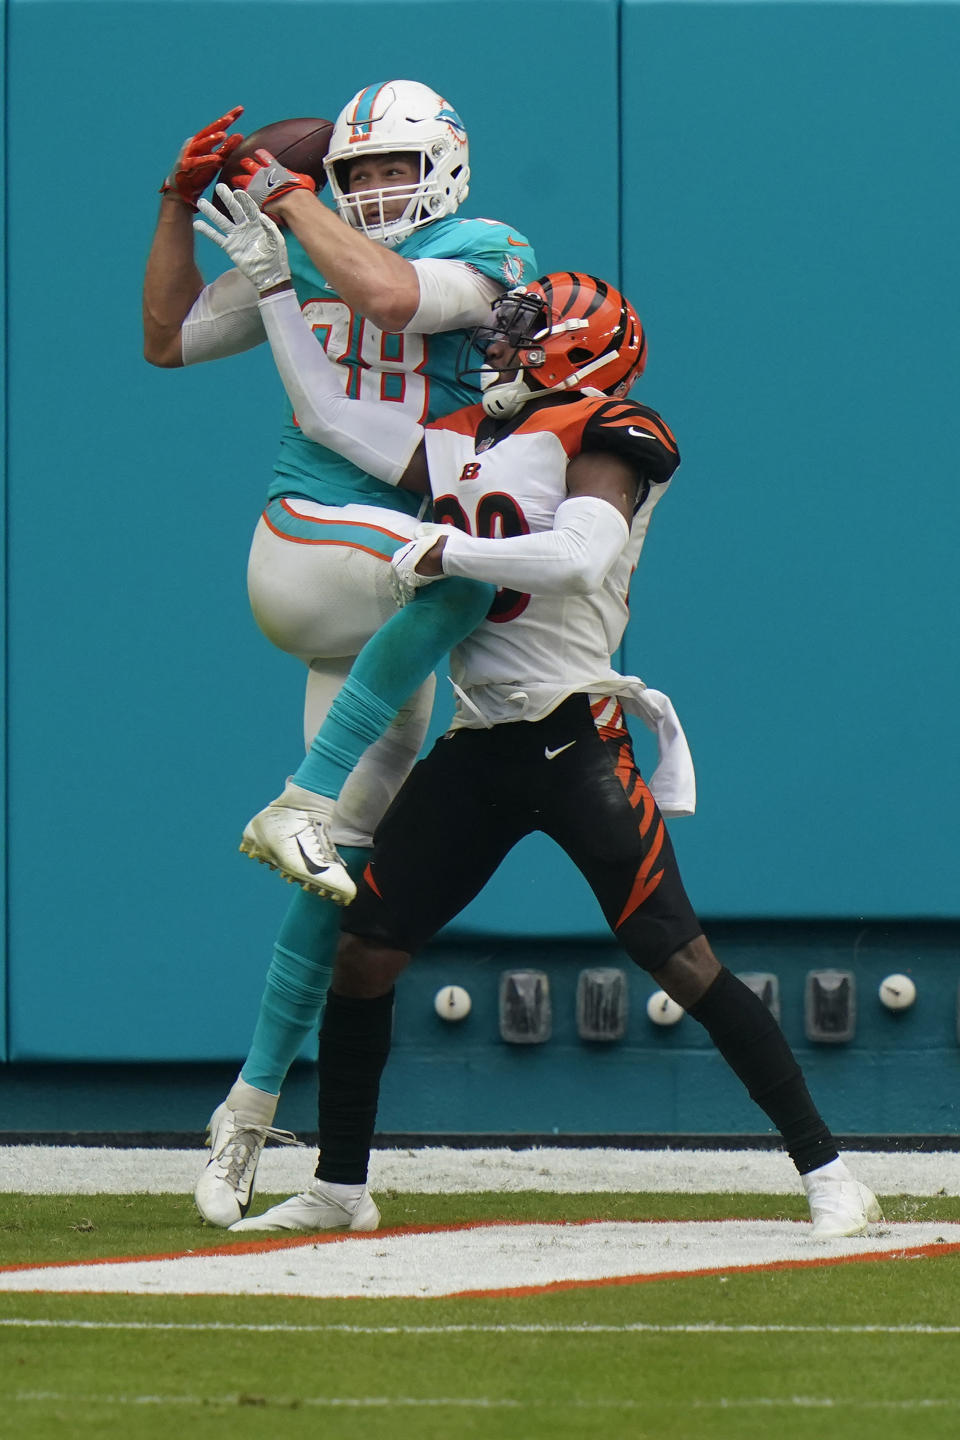 Miami Dolphins tight end Mike Gesicki (88) grabs a pass for a touchdown as Cincinnati Bengals cornerback LeShaun Sims (38) defends, during the second half of an NFL football game, Sunday, Dec. 6, 2020, in Miami Gardens, Fla. (AP Photo/Lynne Sladky)